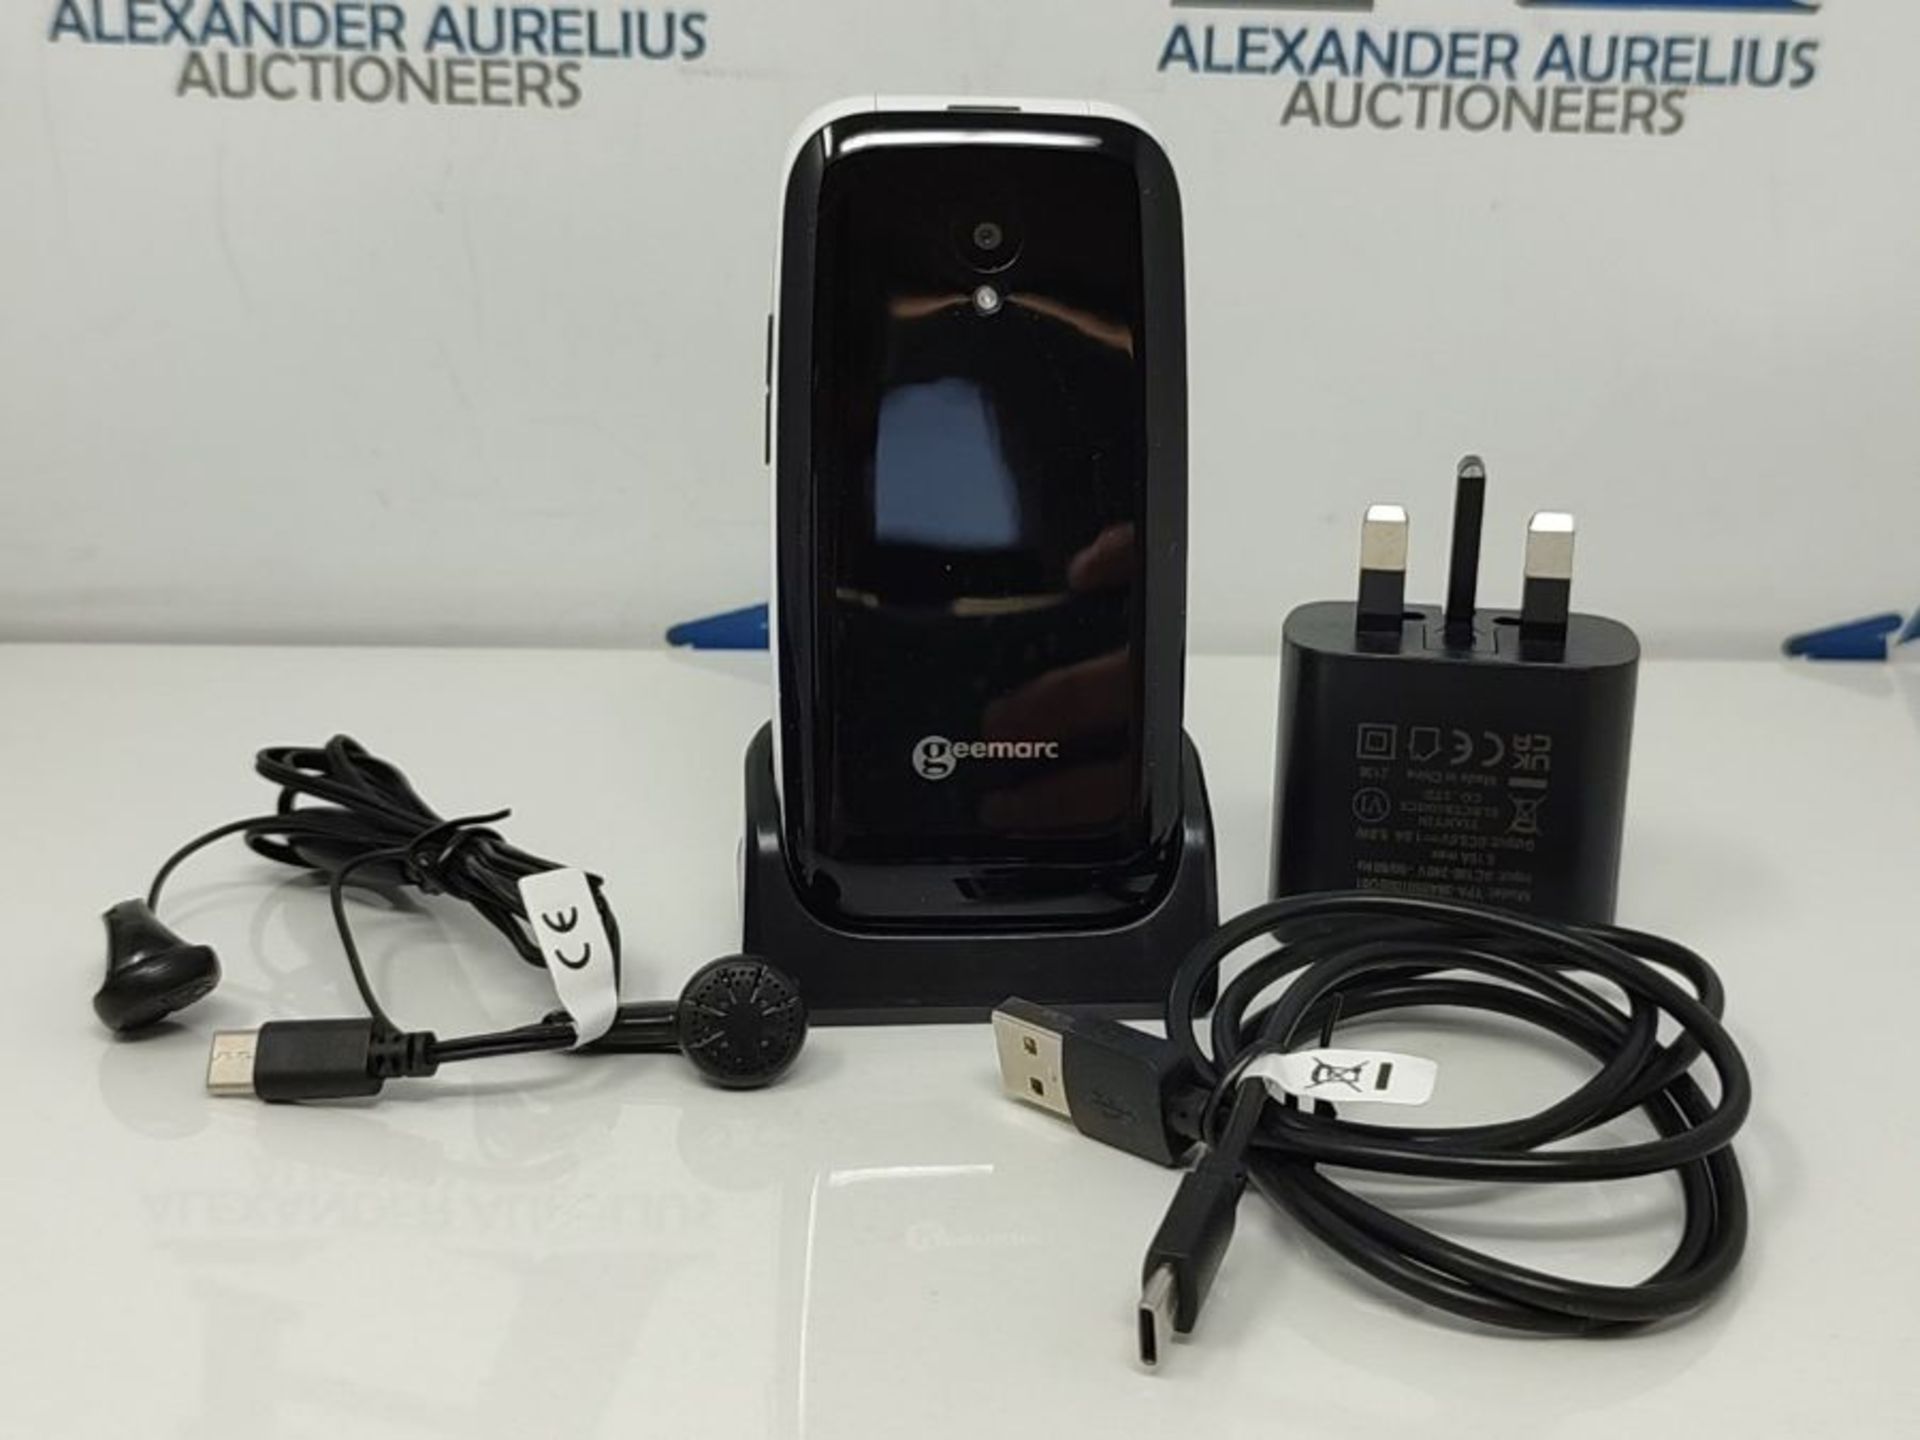 RRP £97.00 Geemarc CL8700-4G Amplified Clamshell Mobile Phone with Large Keys, SOS Function and O - Image 3 of 3